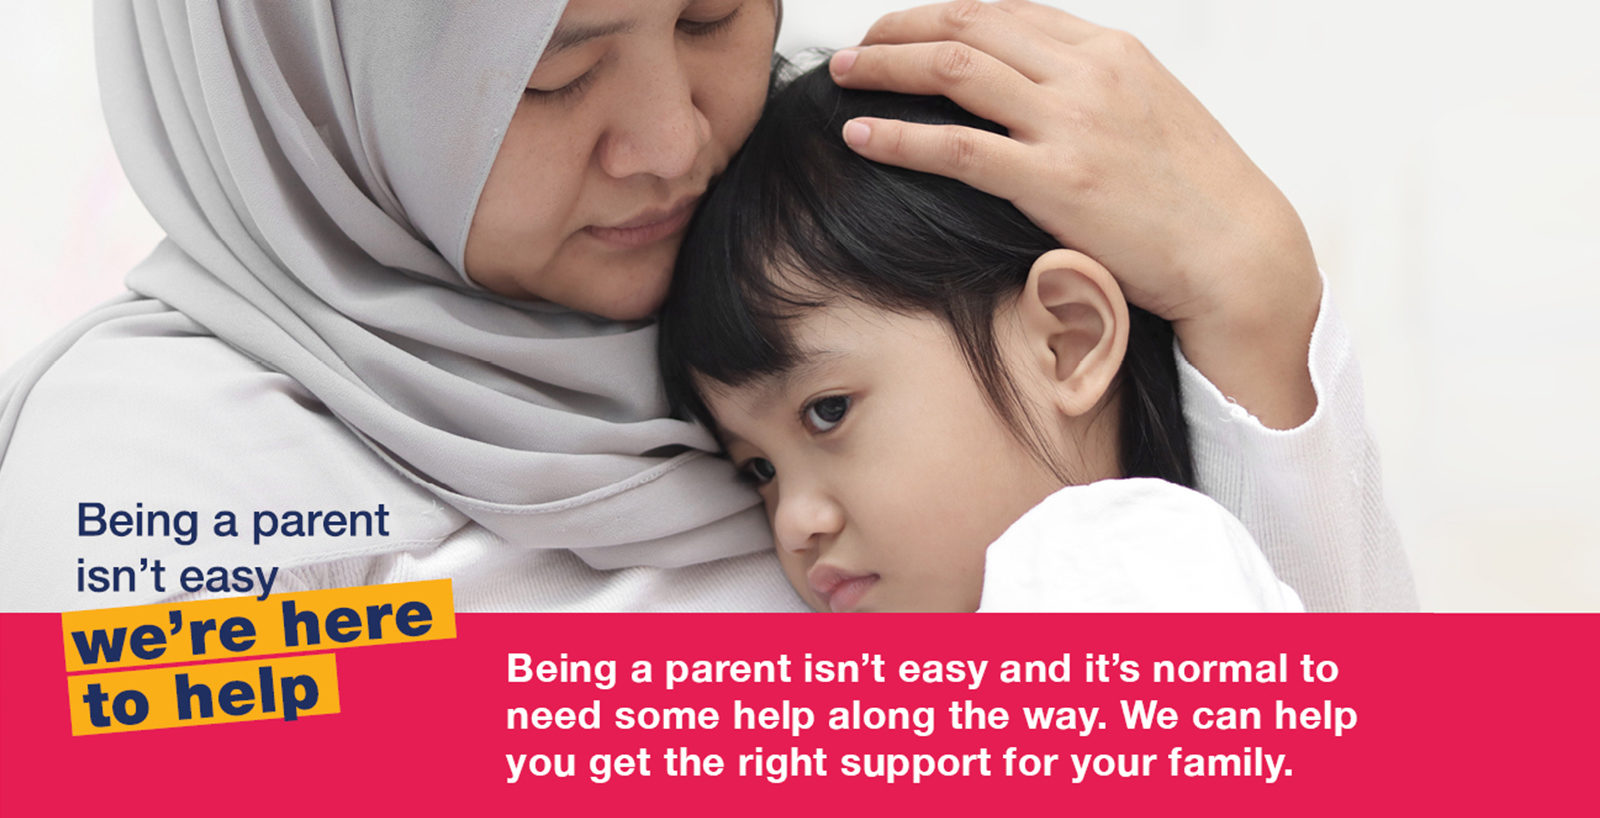 Lambeth Parenting Support are here to help